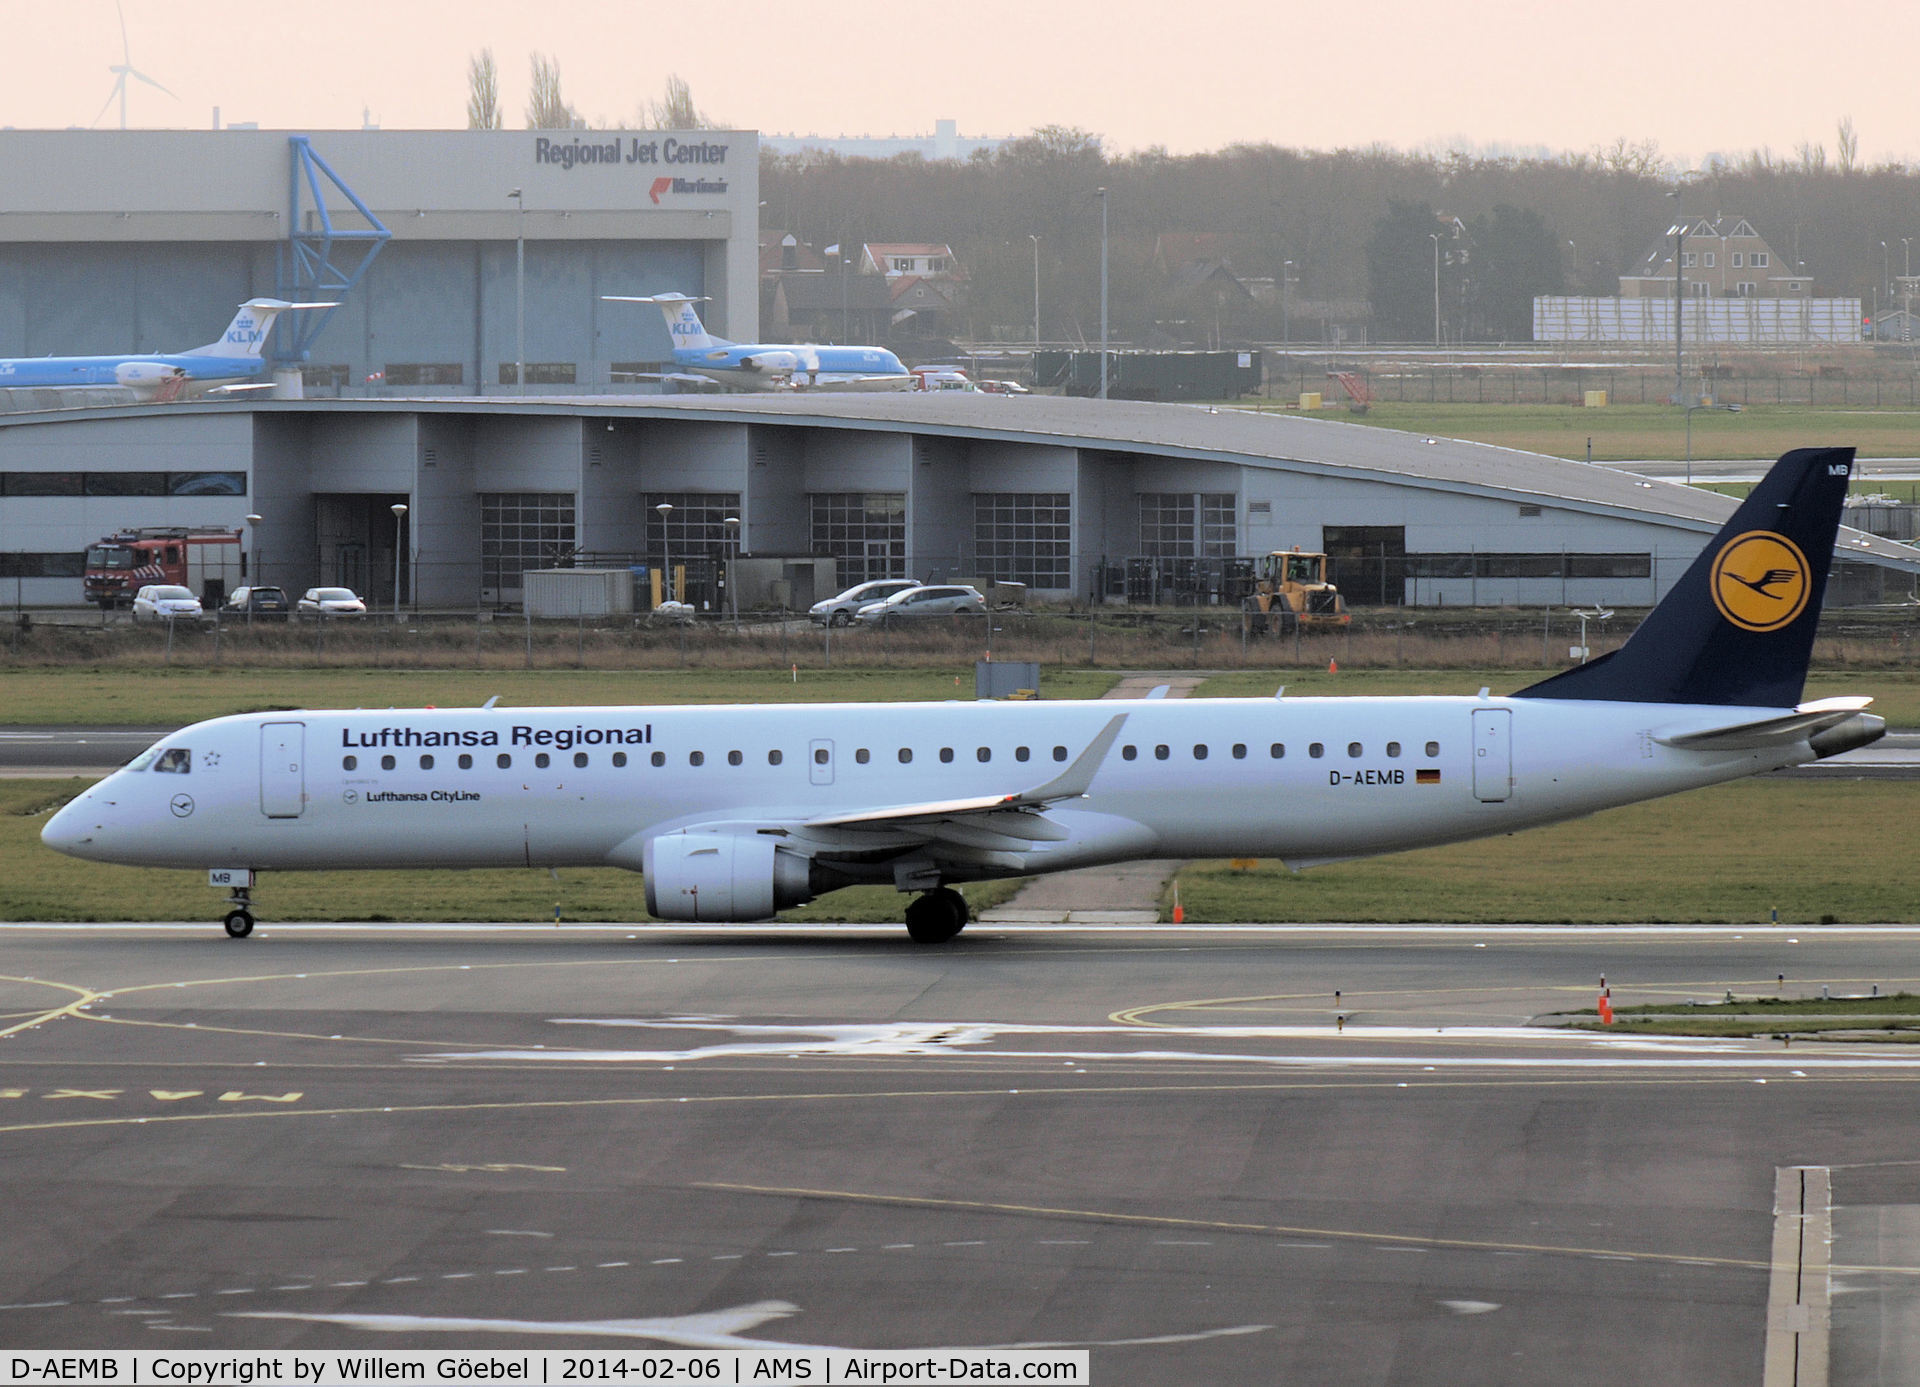 D-AEMB, 2009 Embraer 195LR (ERJ-190-200LR) C/N 19000297, Taxi to runway 18L of Schiphol Airport in L.H  outfit